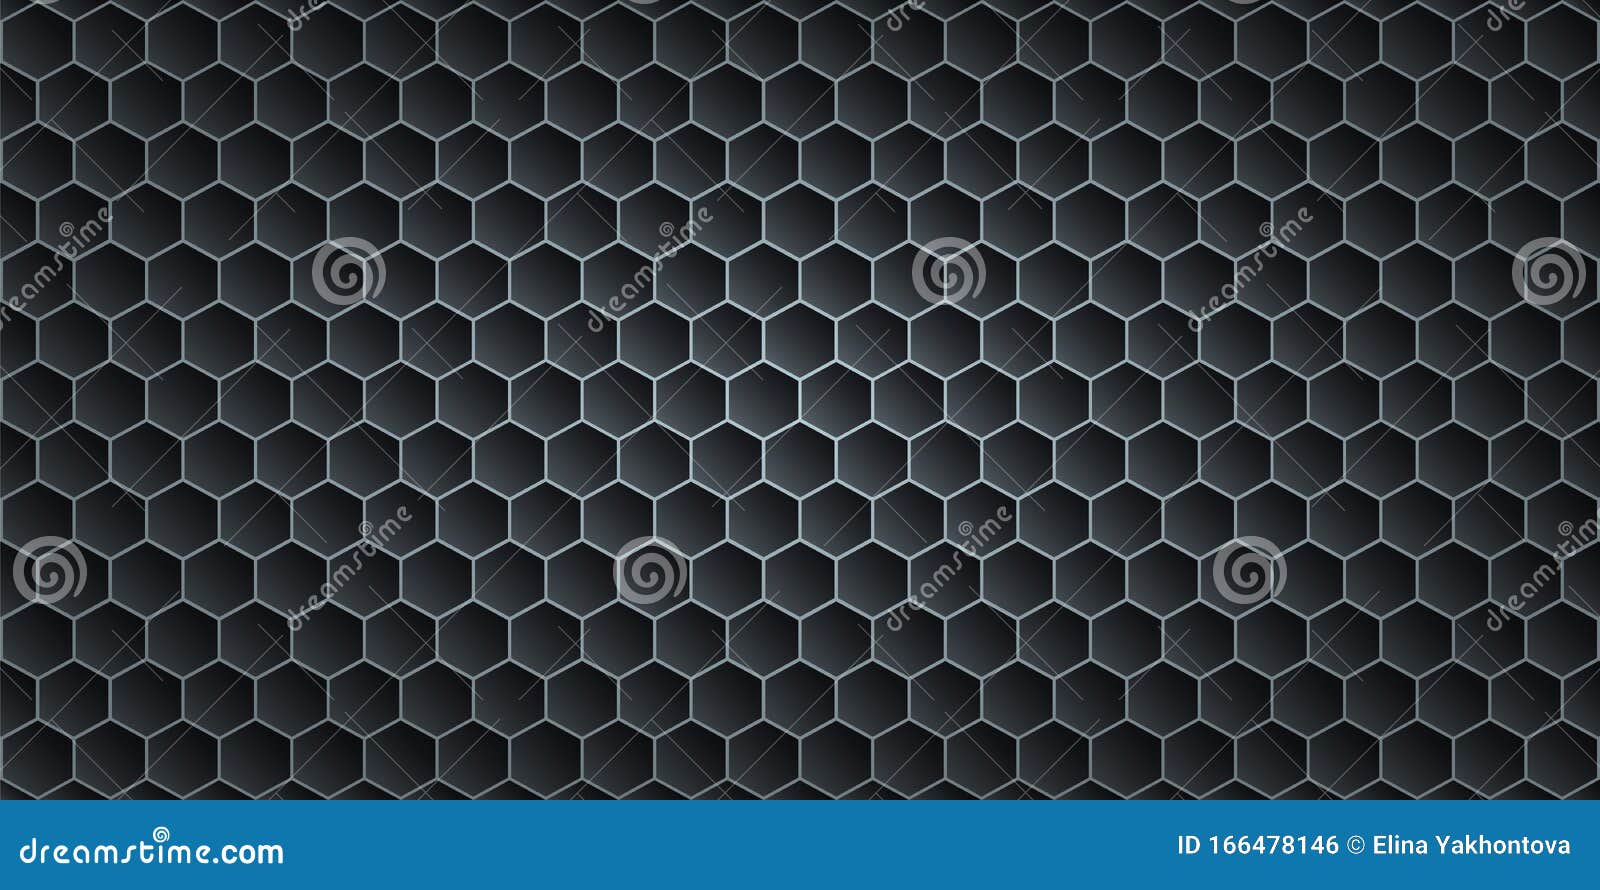 Download Black Metallic Abstract Background, Perforated Steel Hexagon Mesh. Dark Mockup For Cool Banners ...